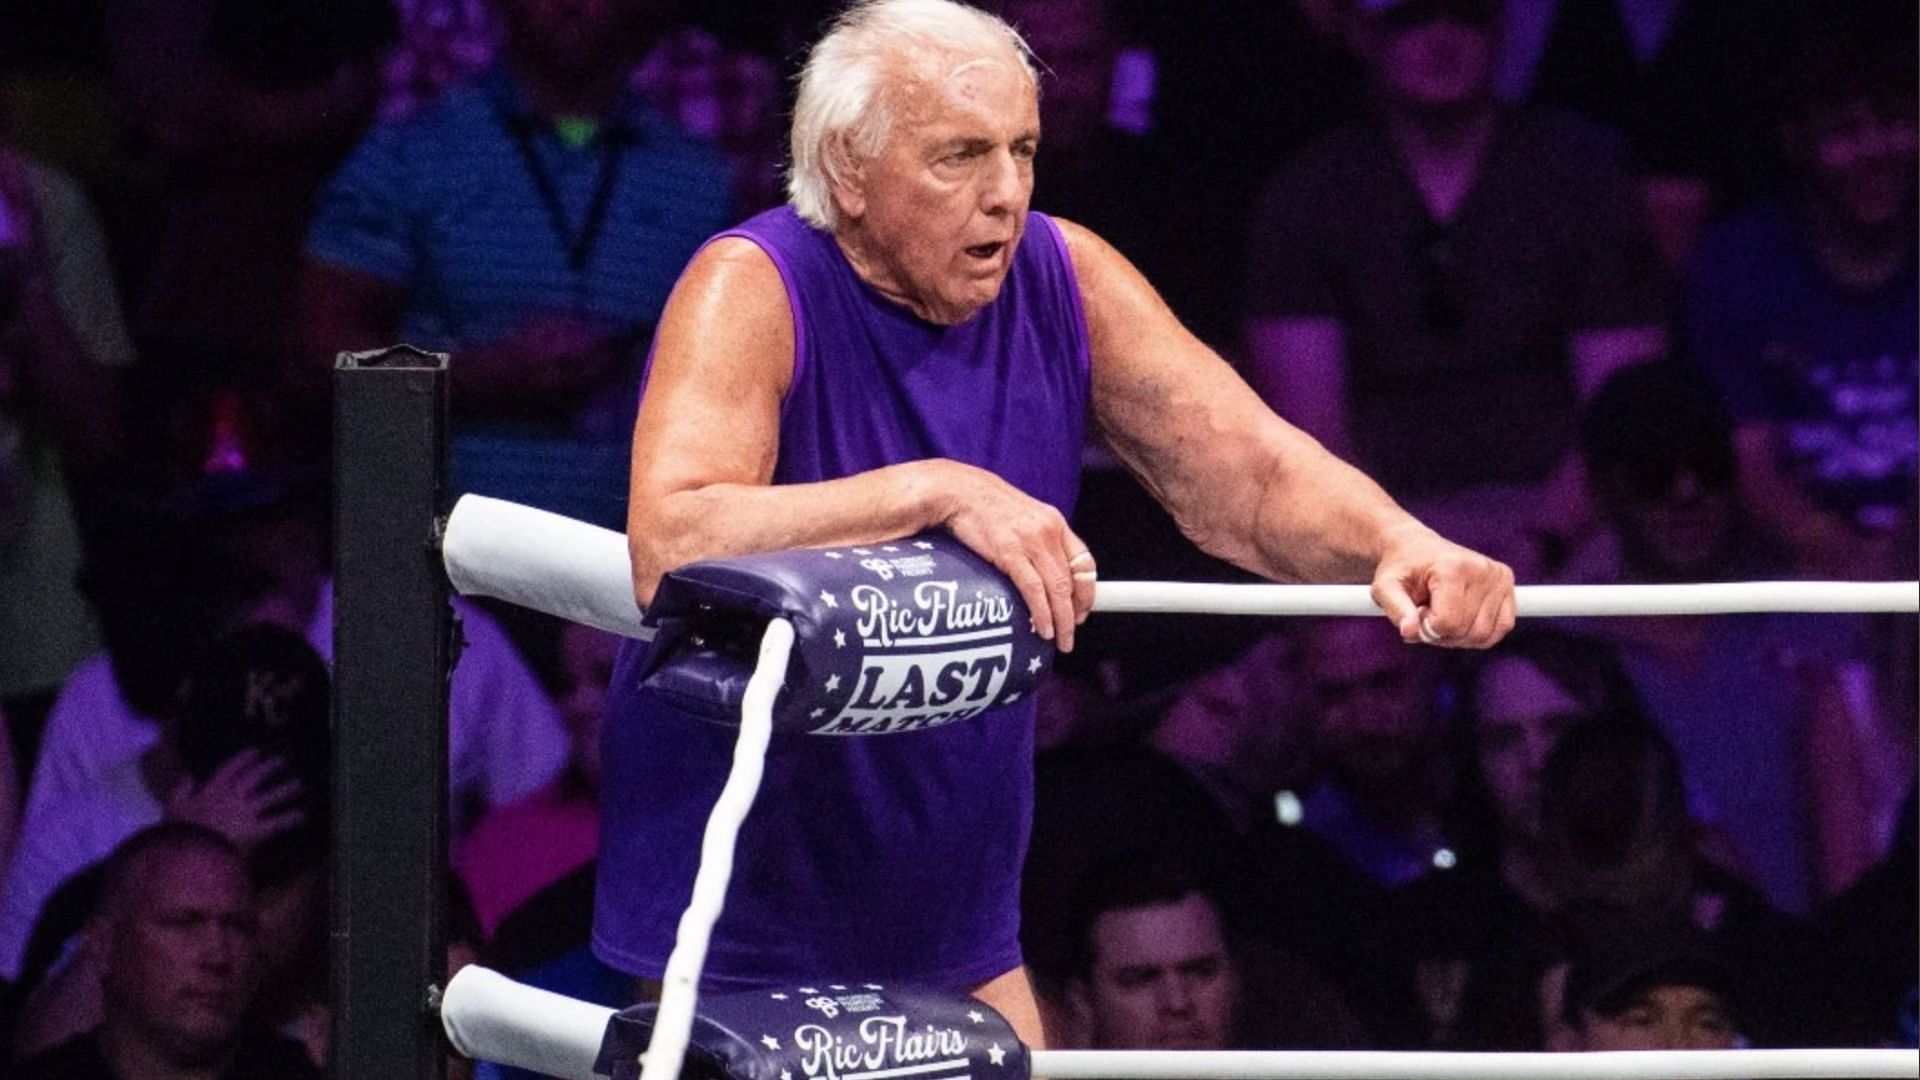 Ric Flair has commented on whether he wants to wrestle again